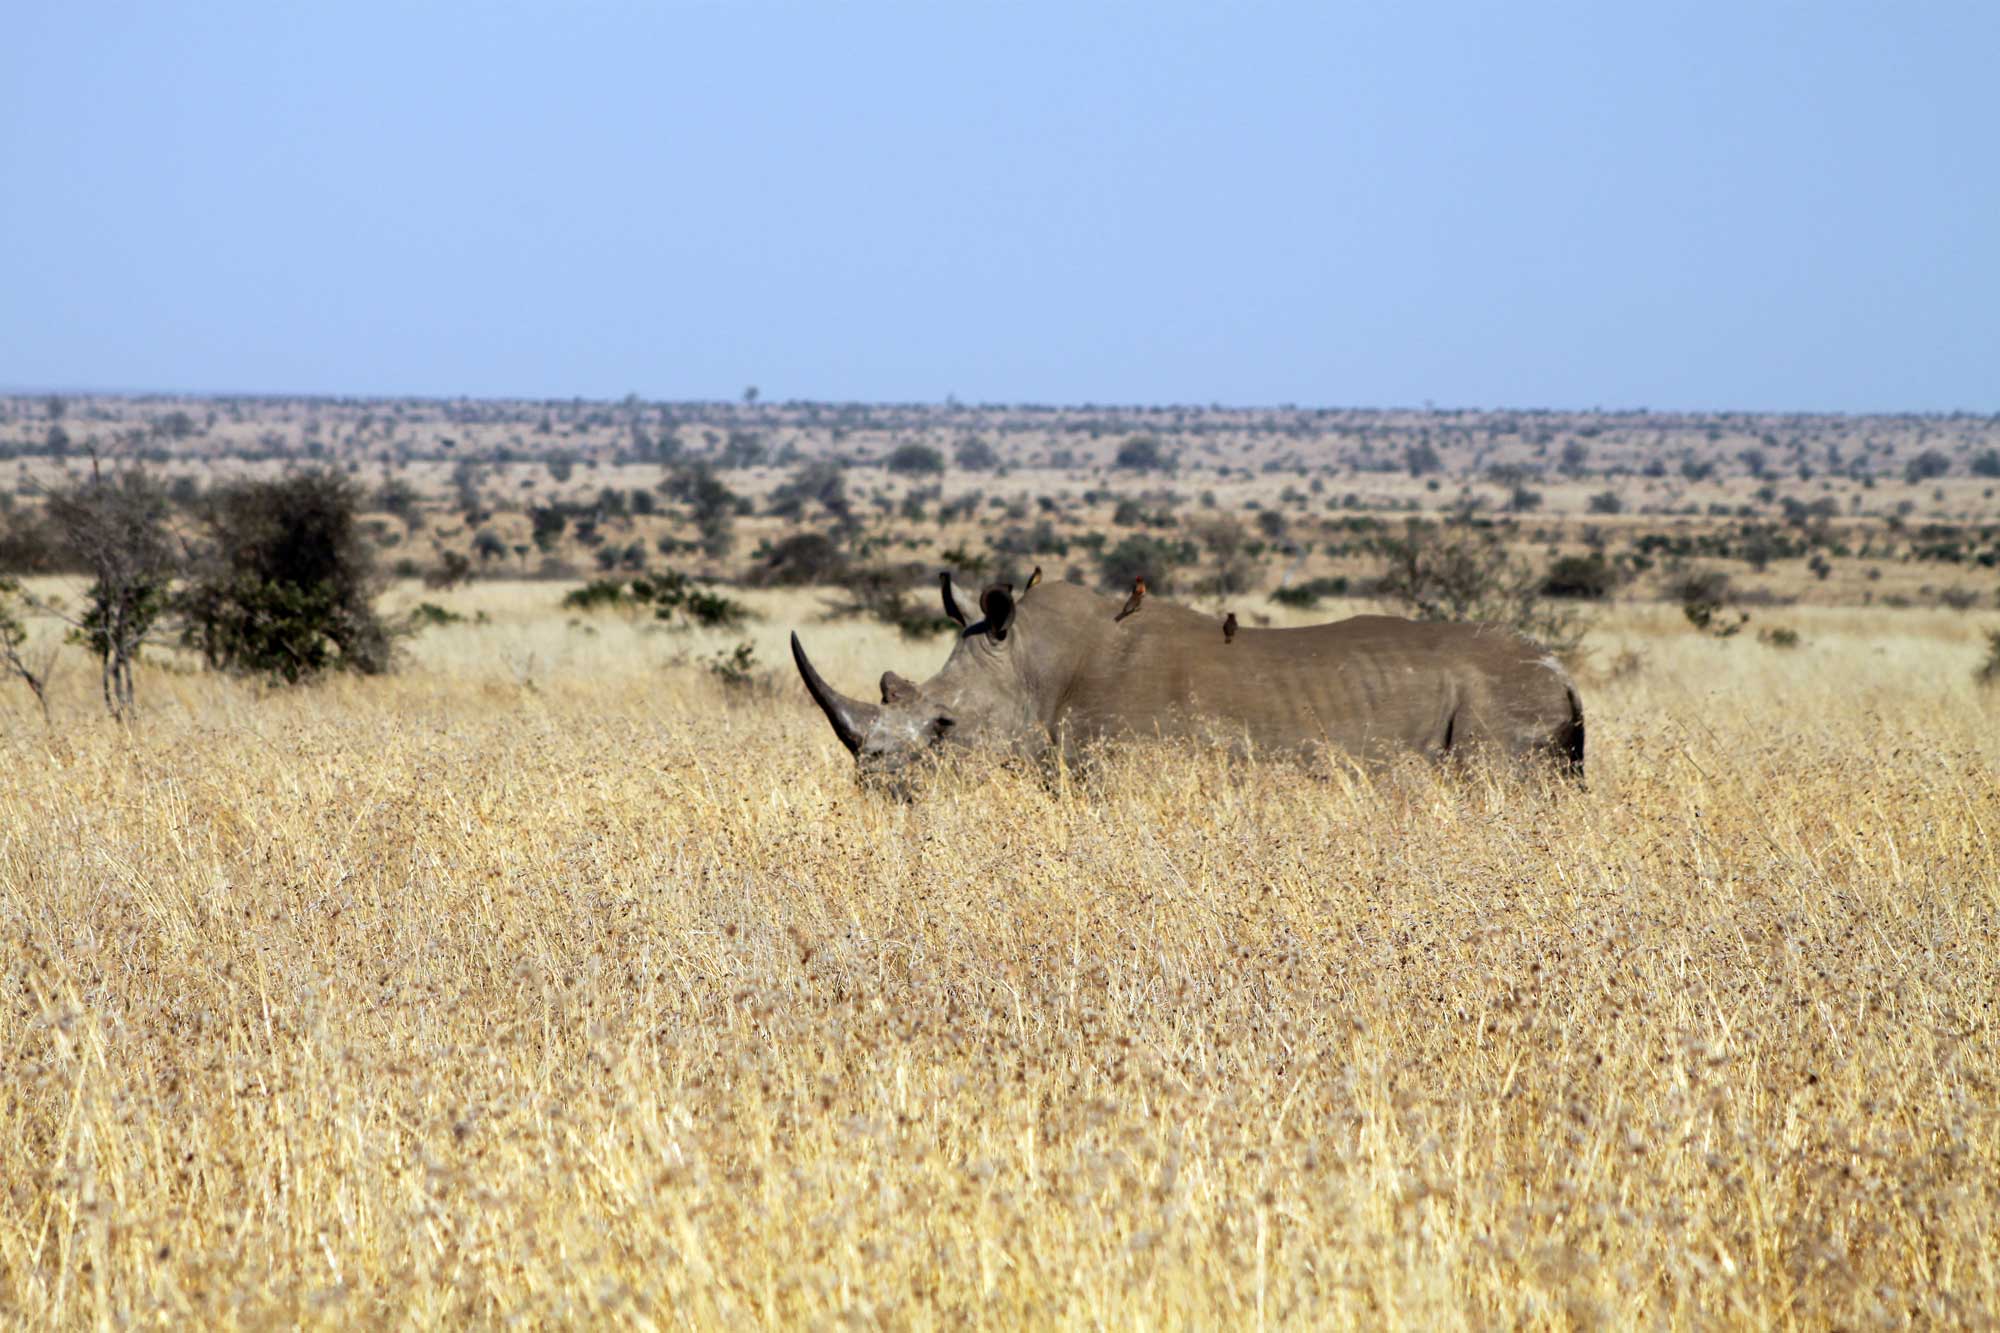 Photograph of a rhino standing in a field of kangaroo grass (also called red grass), Kruger National Park, South Africa.